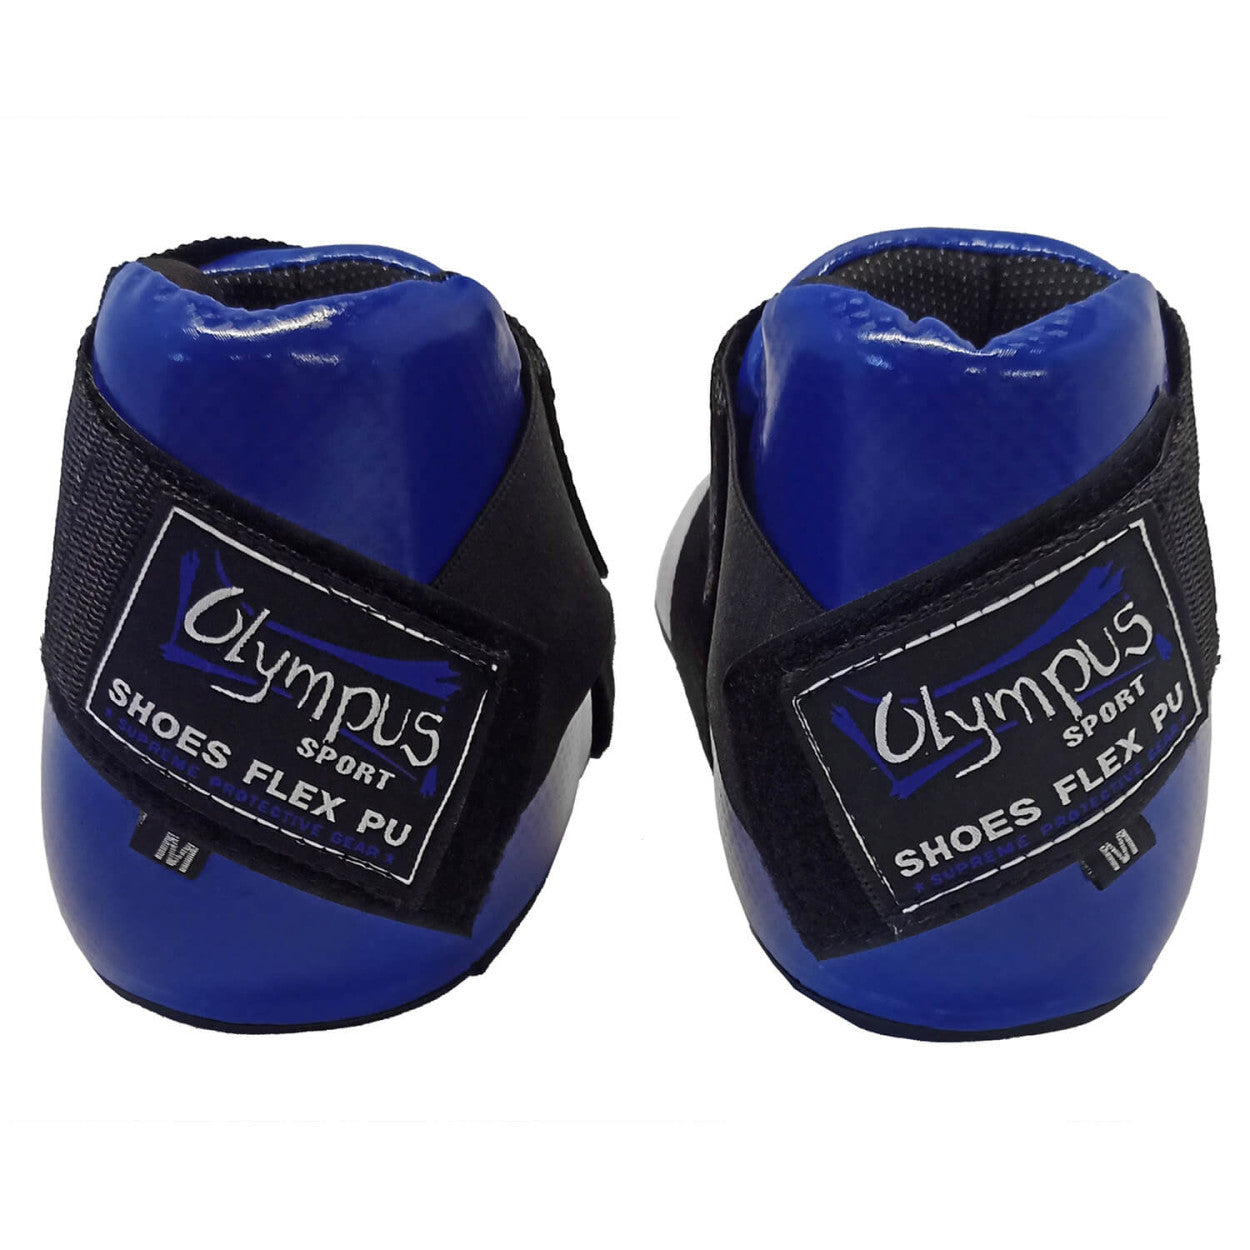 Pointfighting Shoes Olympus Carbon Fiber PU